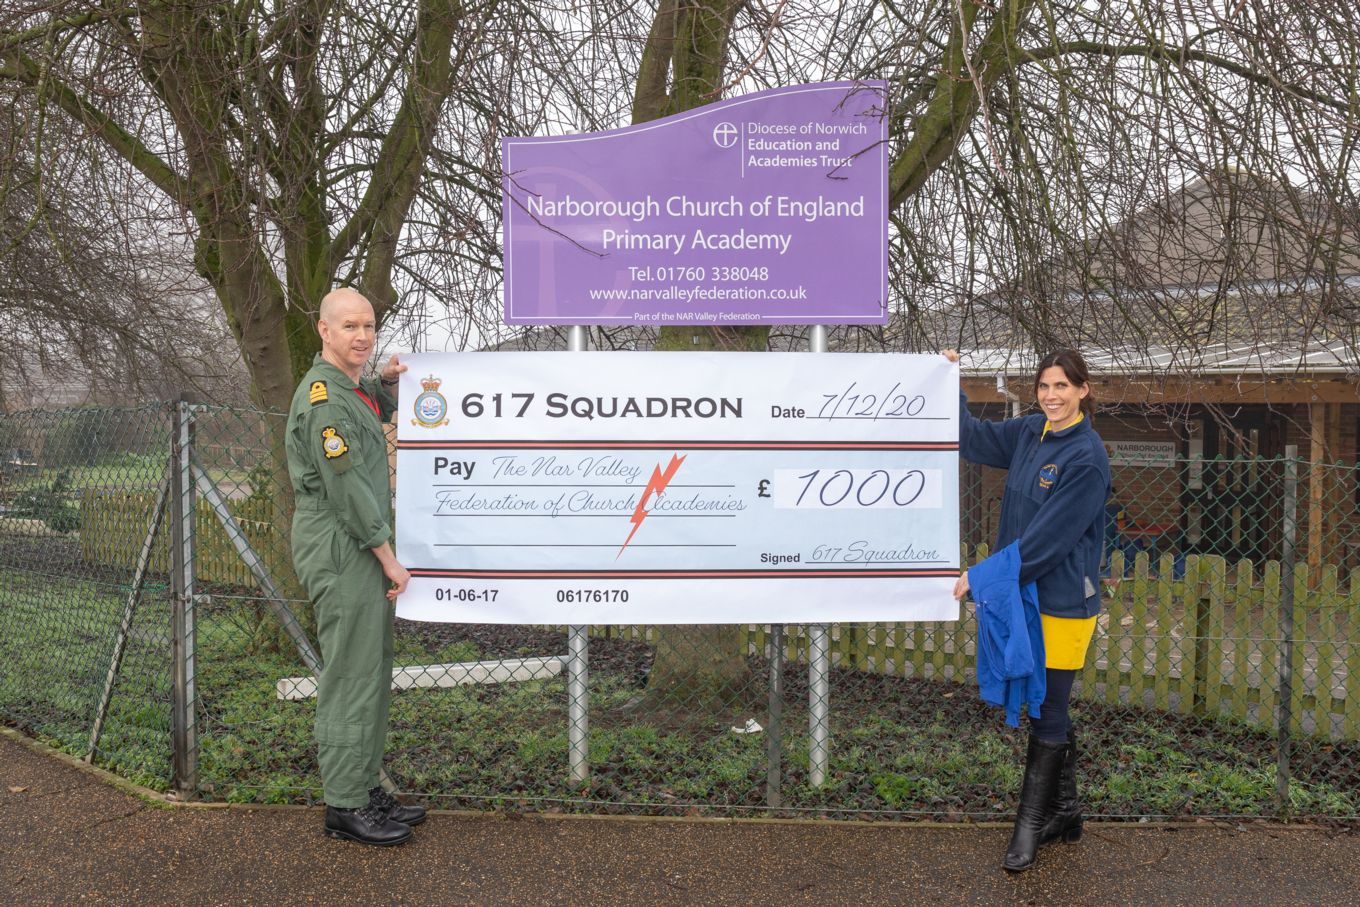 Handover of the giant cheque for £1000 in front of Narborough Primary School